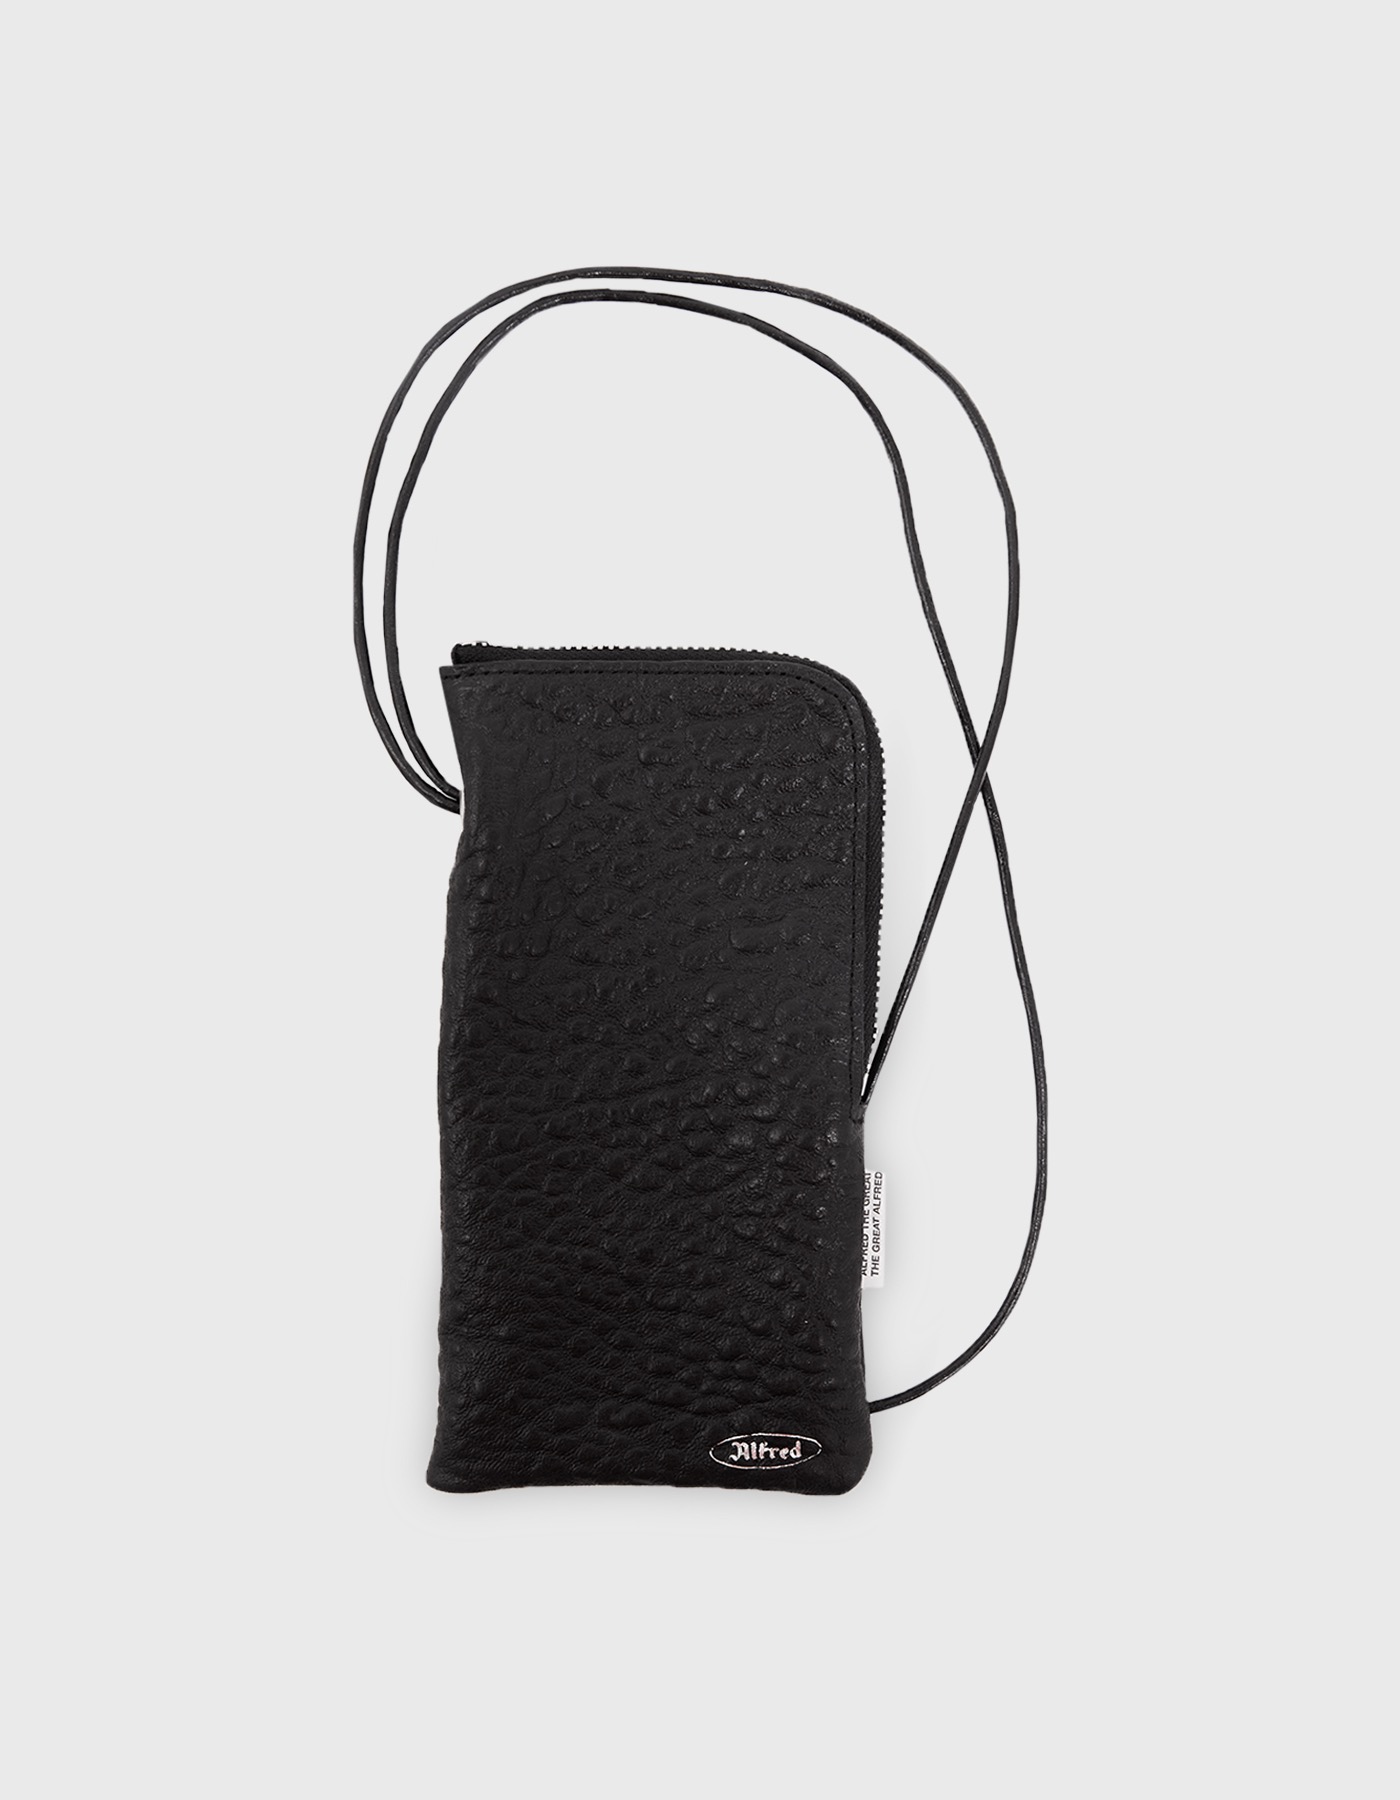 FRED LEATHER POUCH / Black